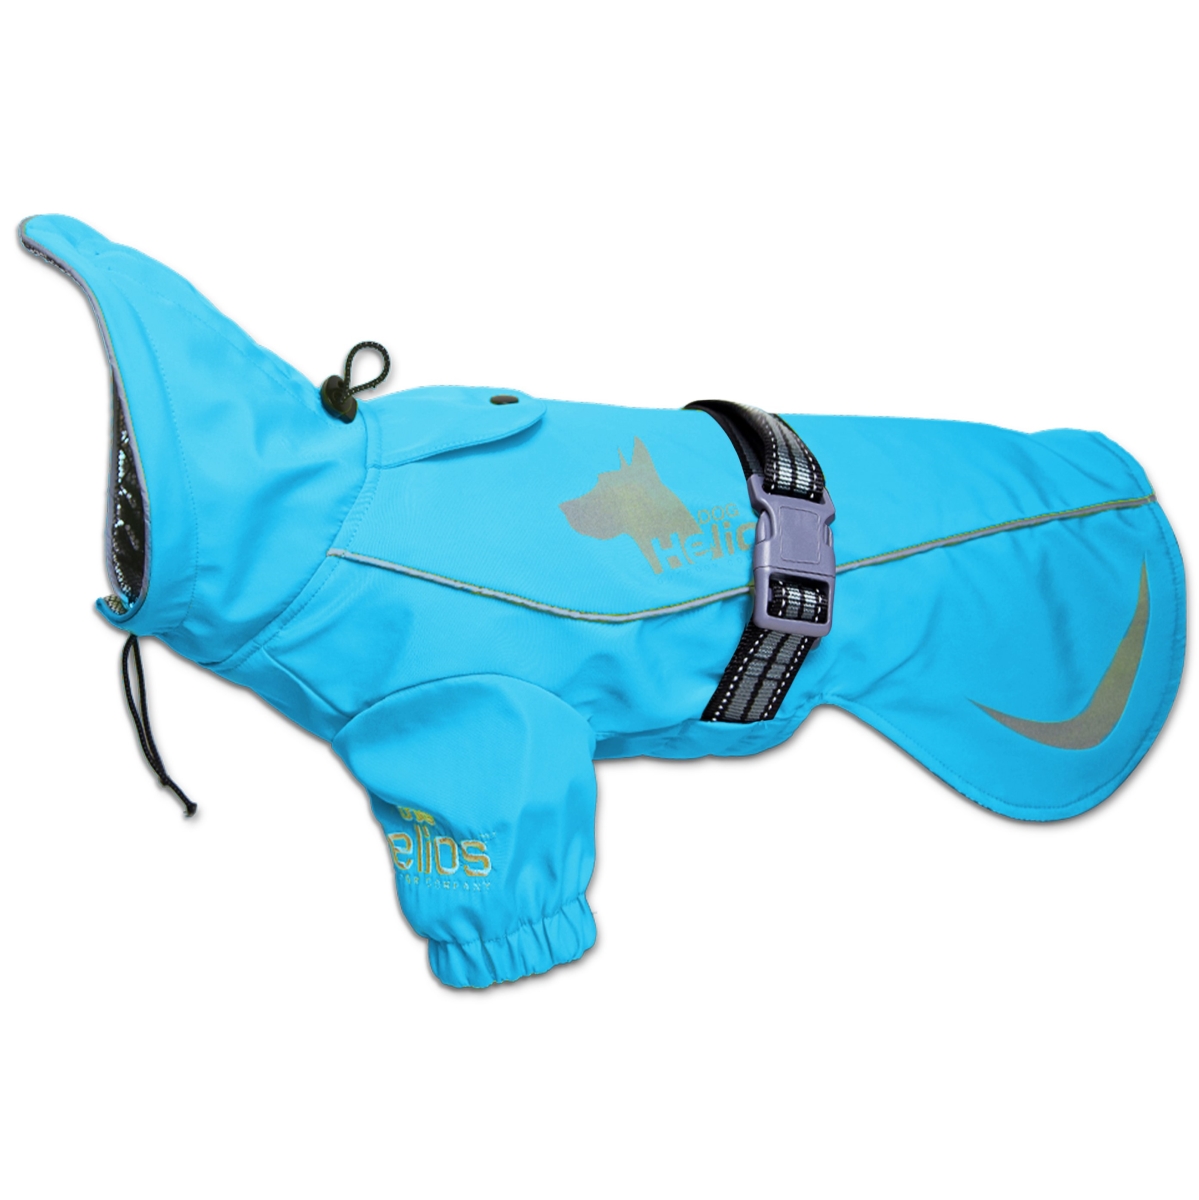 Picture of Dog Helios JKHL16BLMD Ice-Breaker Extendable Hooded Dog Coat with Heat Reflective Tech - Blue - Medium